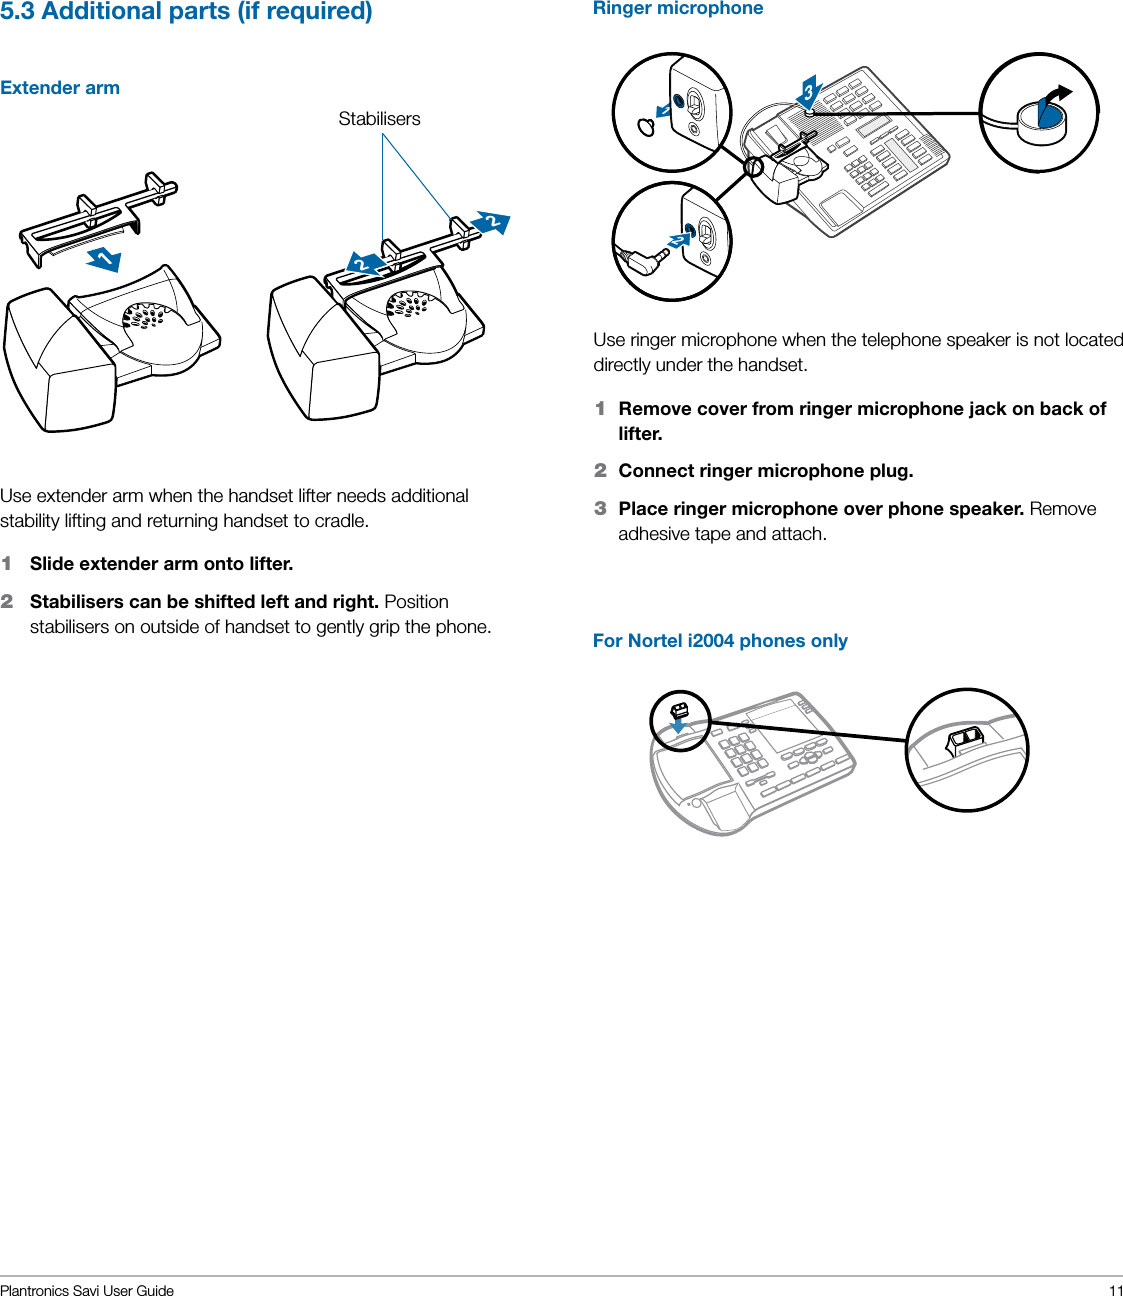 Plantronics Savi User Guide 115.3 Additional parts (if required) Extender arm122123Use extender arm when the handset lifter needs additional stability lifting and returning handset to cradle.1   Slide extender arm onto lifter.2    Stabilisers can be shifted left and right. Position stabilisers on outside of handset to gently grip the phone.Use ringer microphone when the telephone speaker is not located directly under the handset.1  Remove cover from ringer microphone jack on back of lifter.2  Connect ringer microphone plug.3  Place ringer microphone over phone speaker. Remove adhesive tape and attach.For Nortel i2004 phones onlyStabilisersRinger microphone